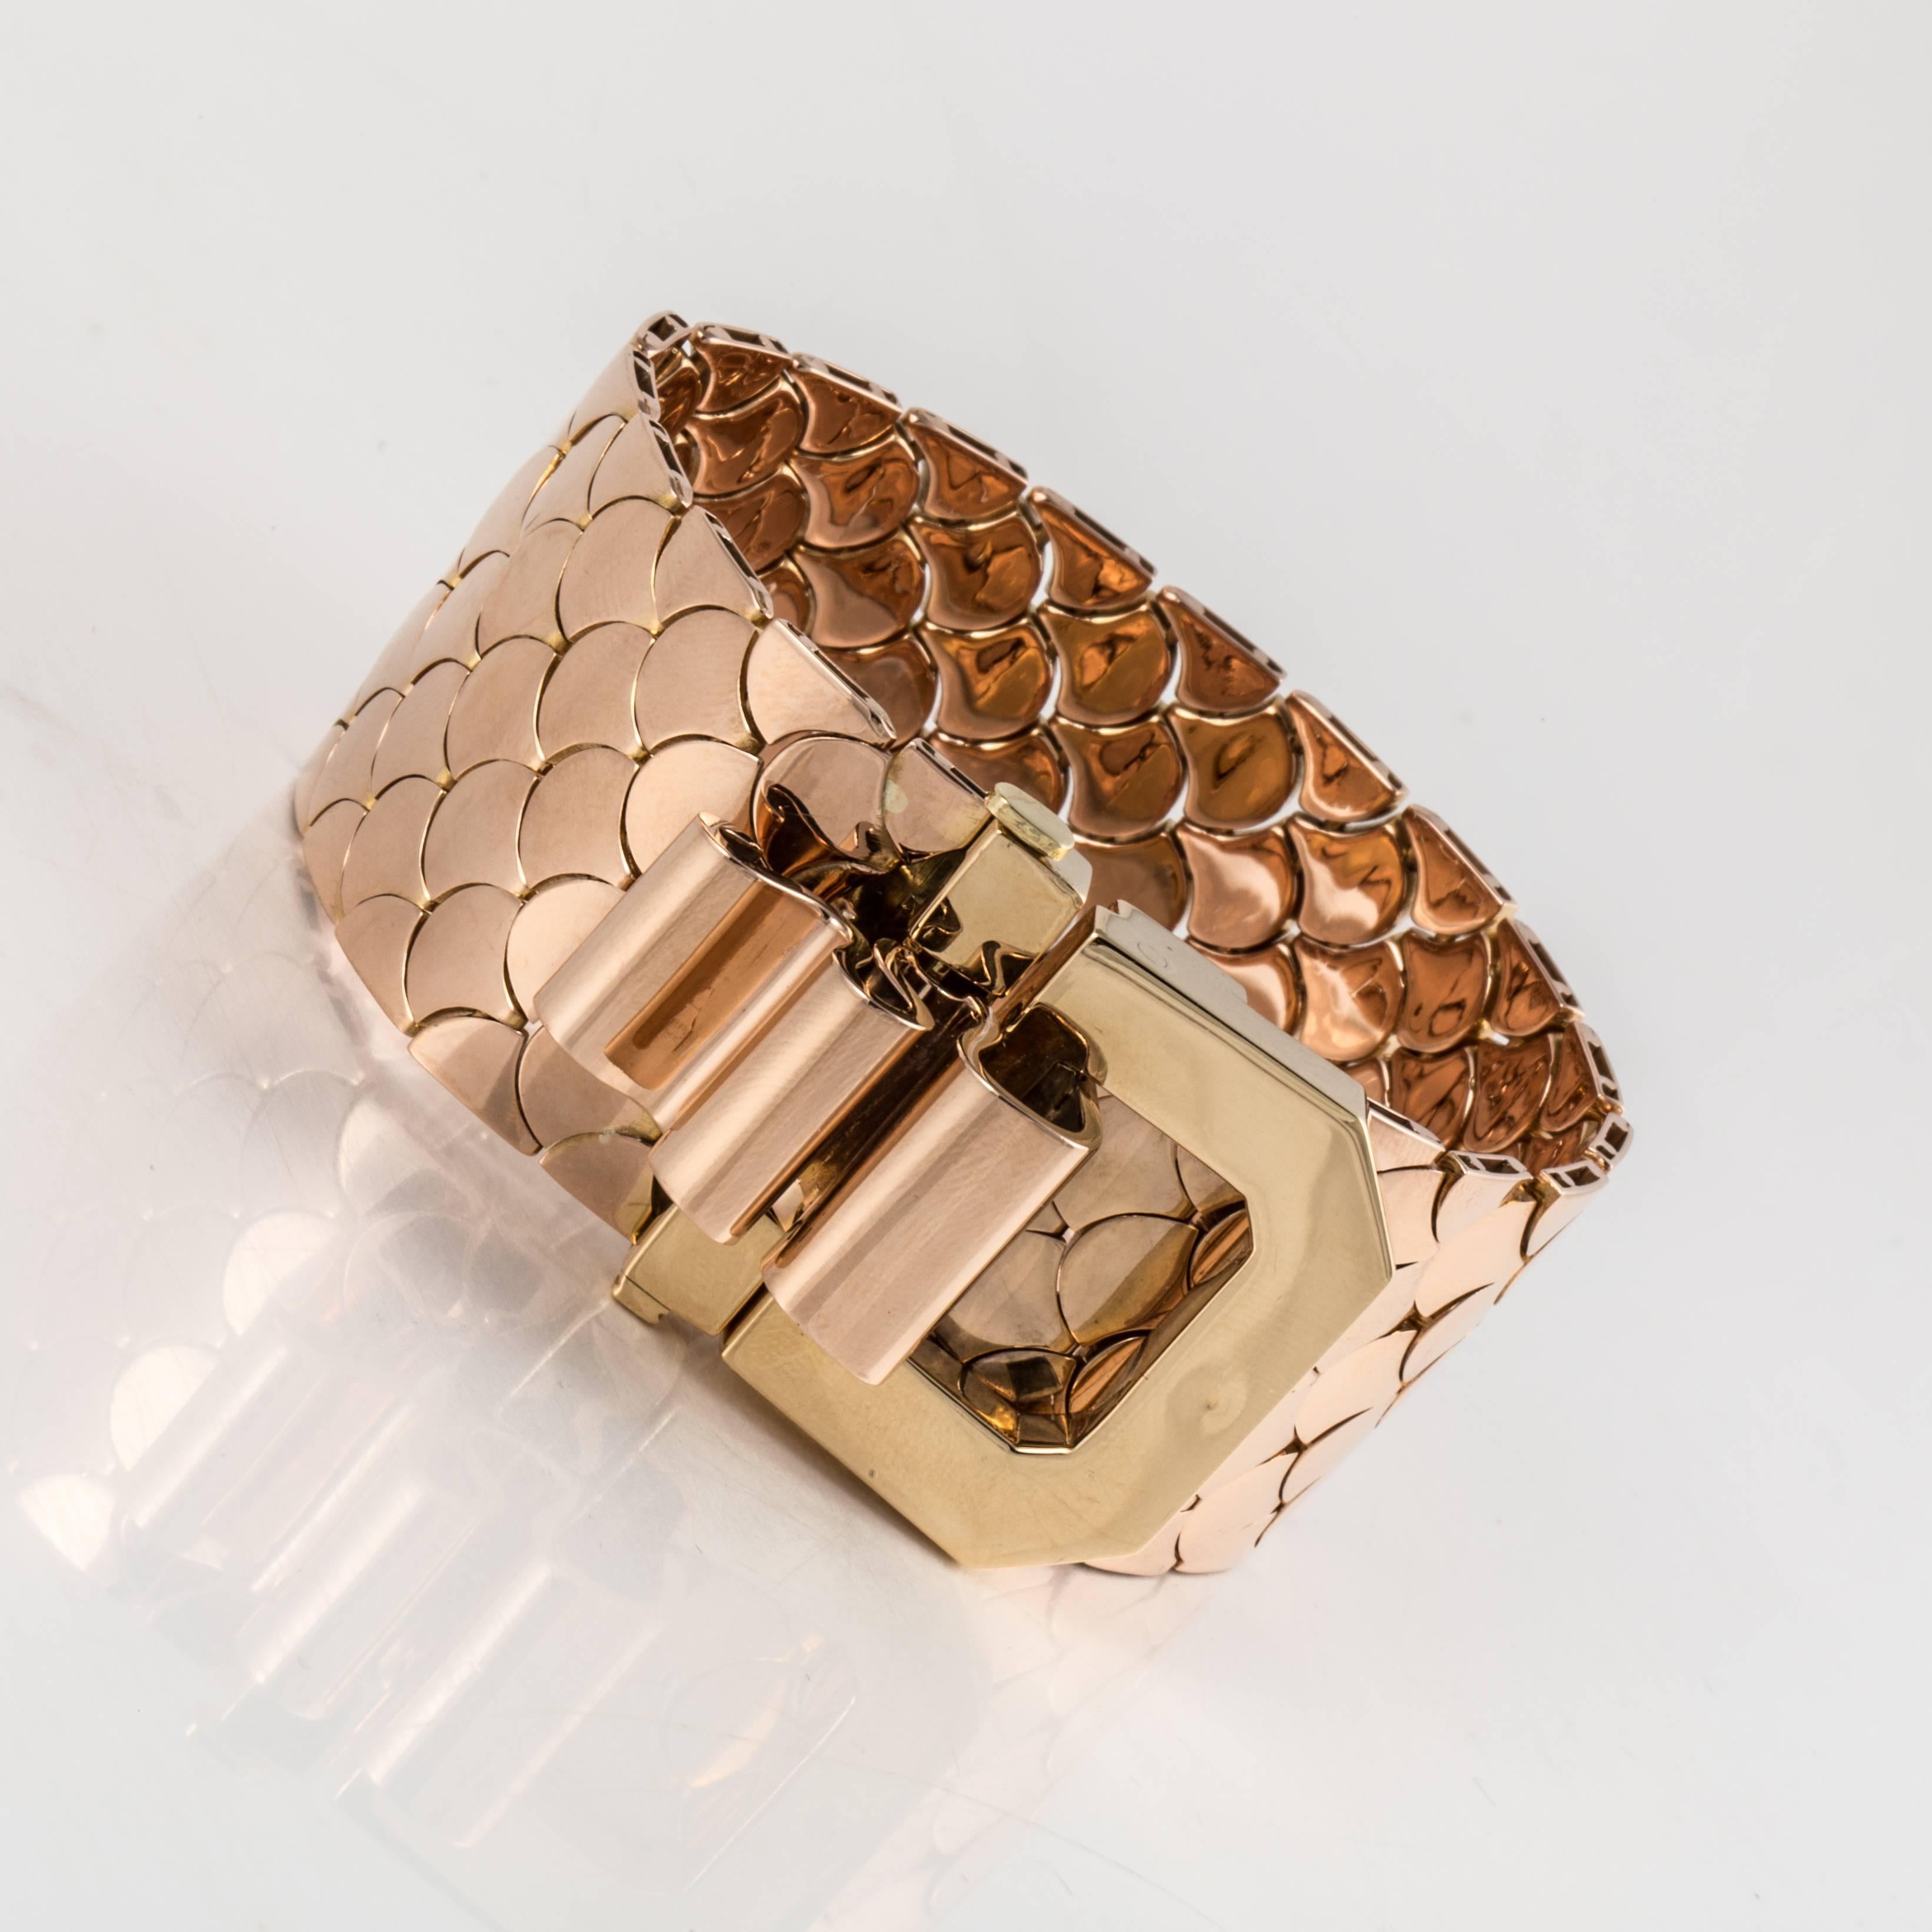 18K rose gold French bracelet. Features a scale design with a large buckle style closure. Measures 7 1/16 inches long and 1-1/8 inches wide. The buckle stands 1-1/16 inches tall.  